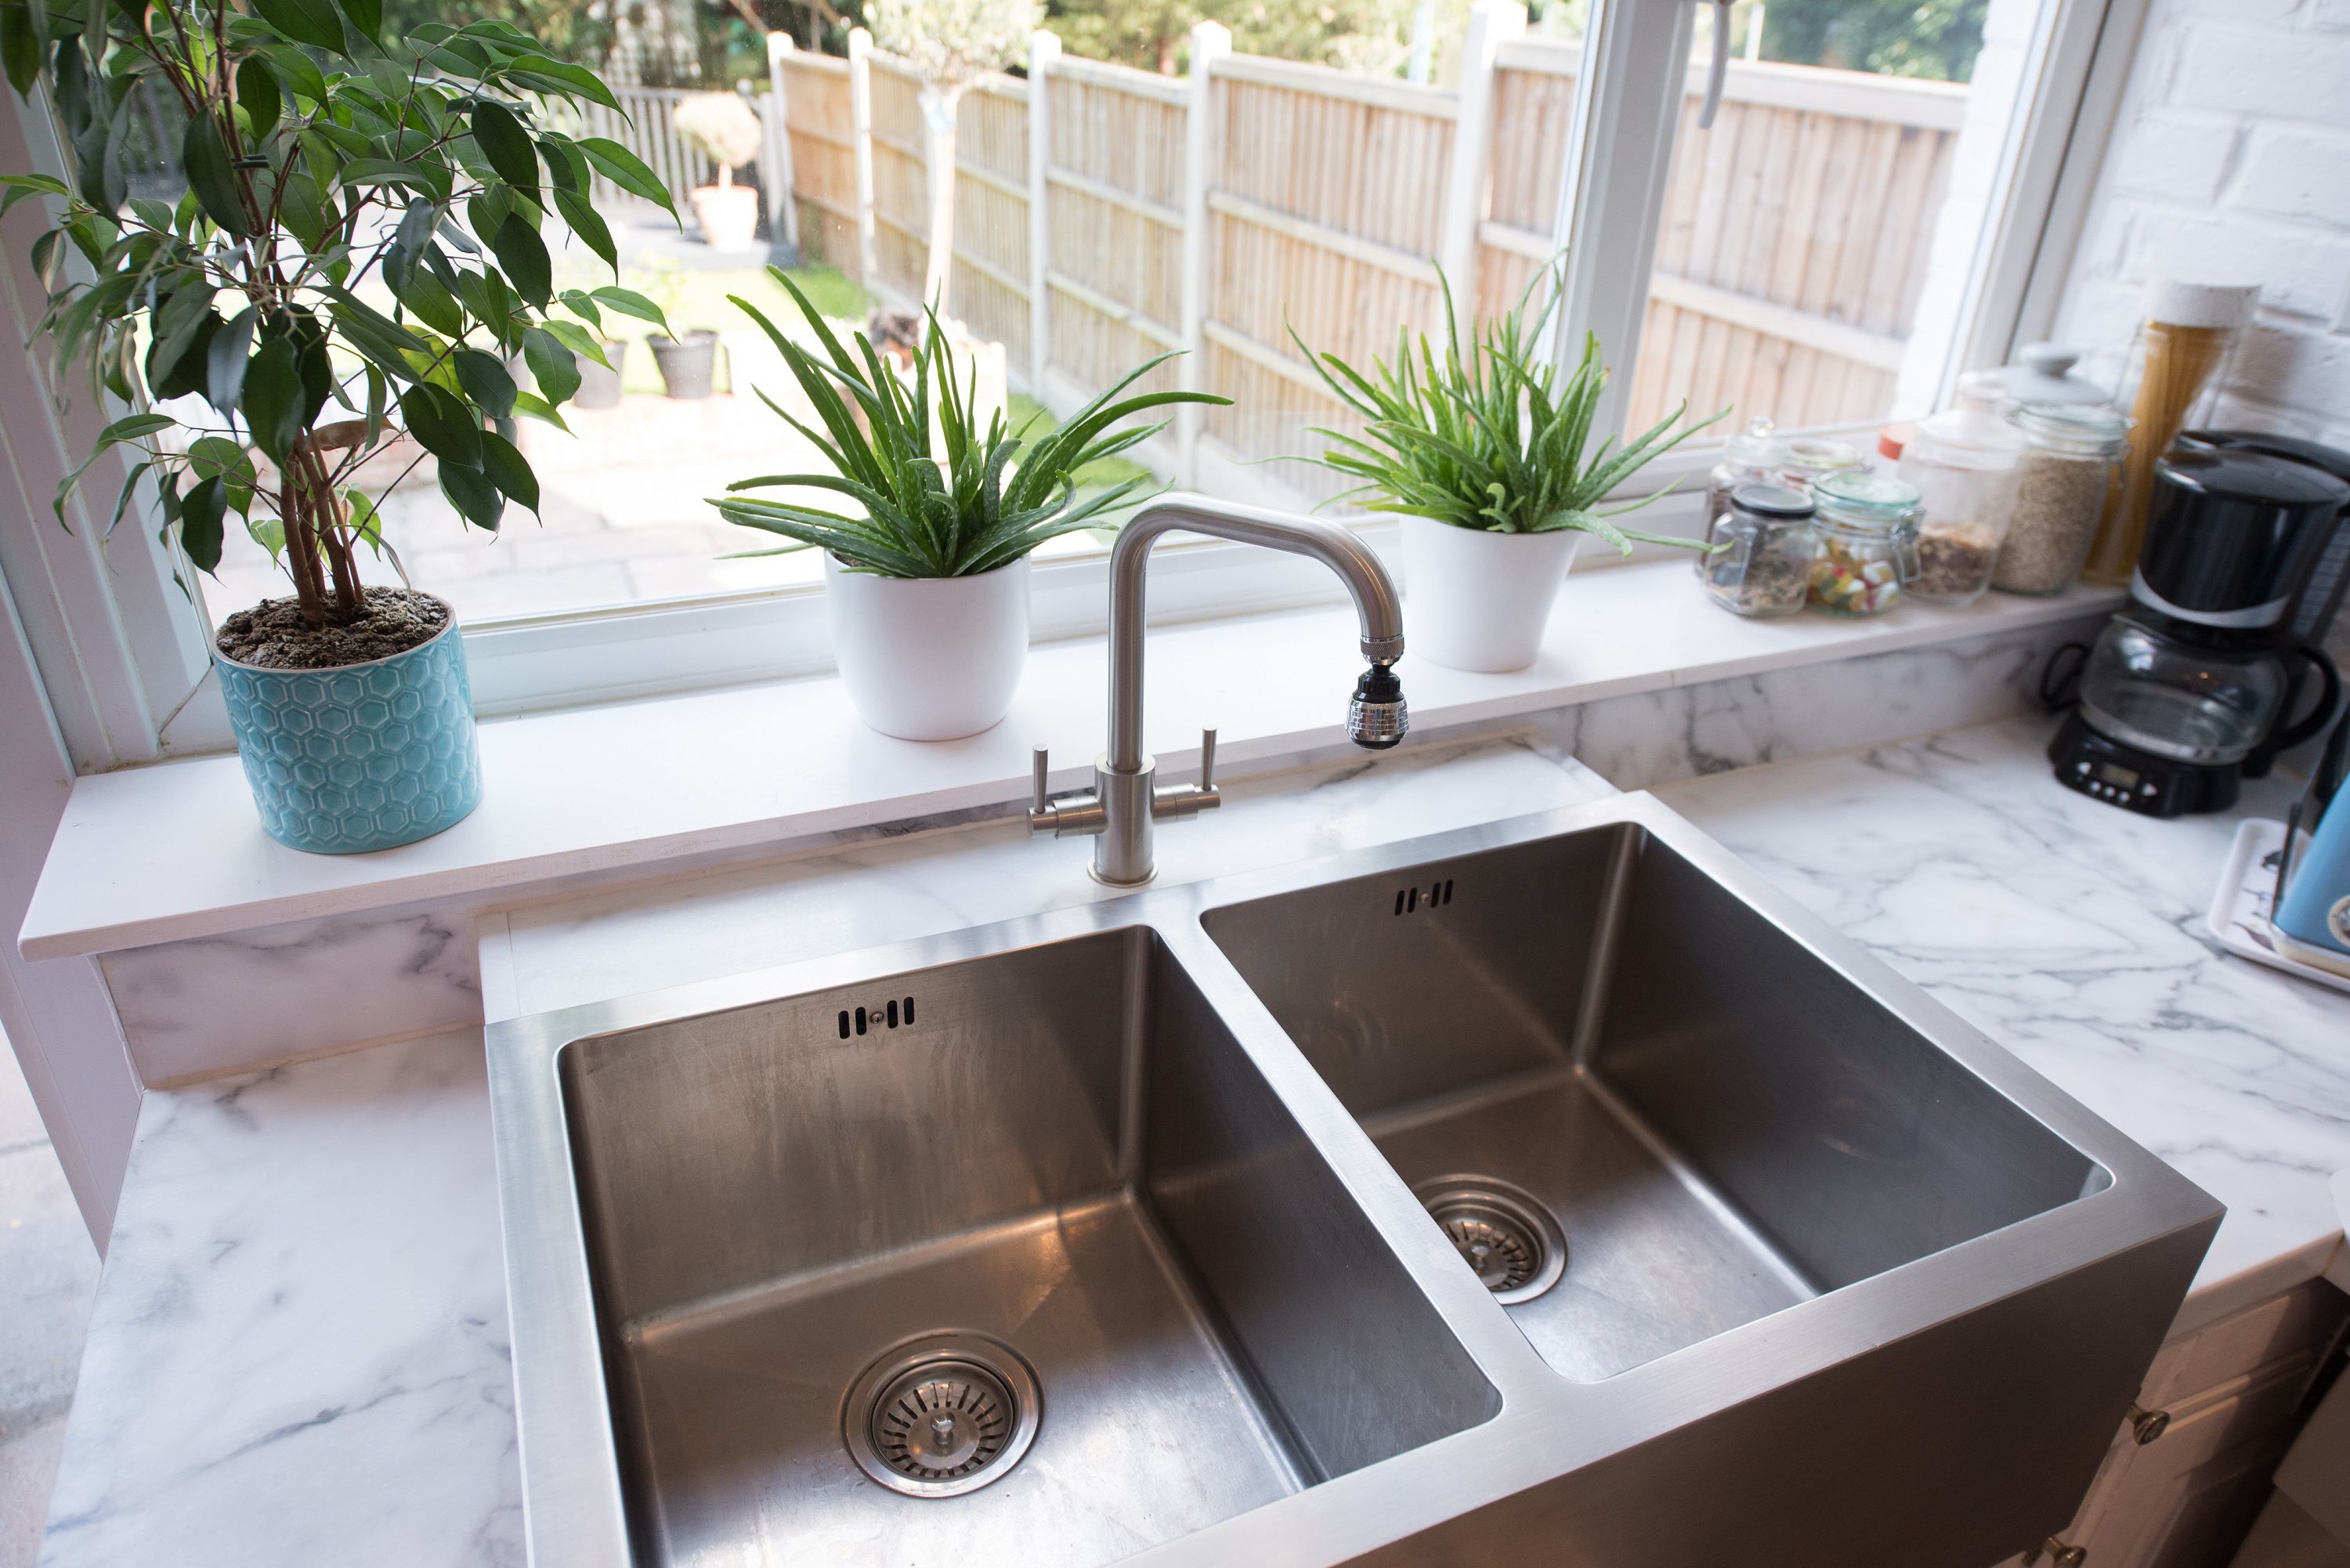 The Easiest Way to Clean a Stainless Steel Sink